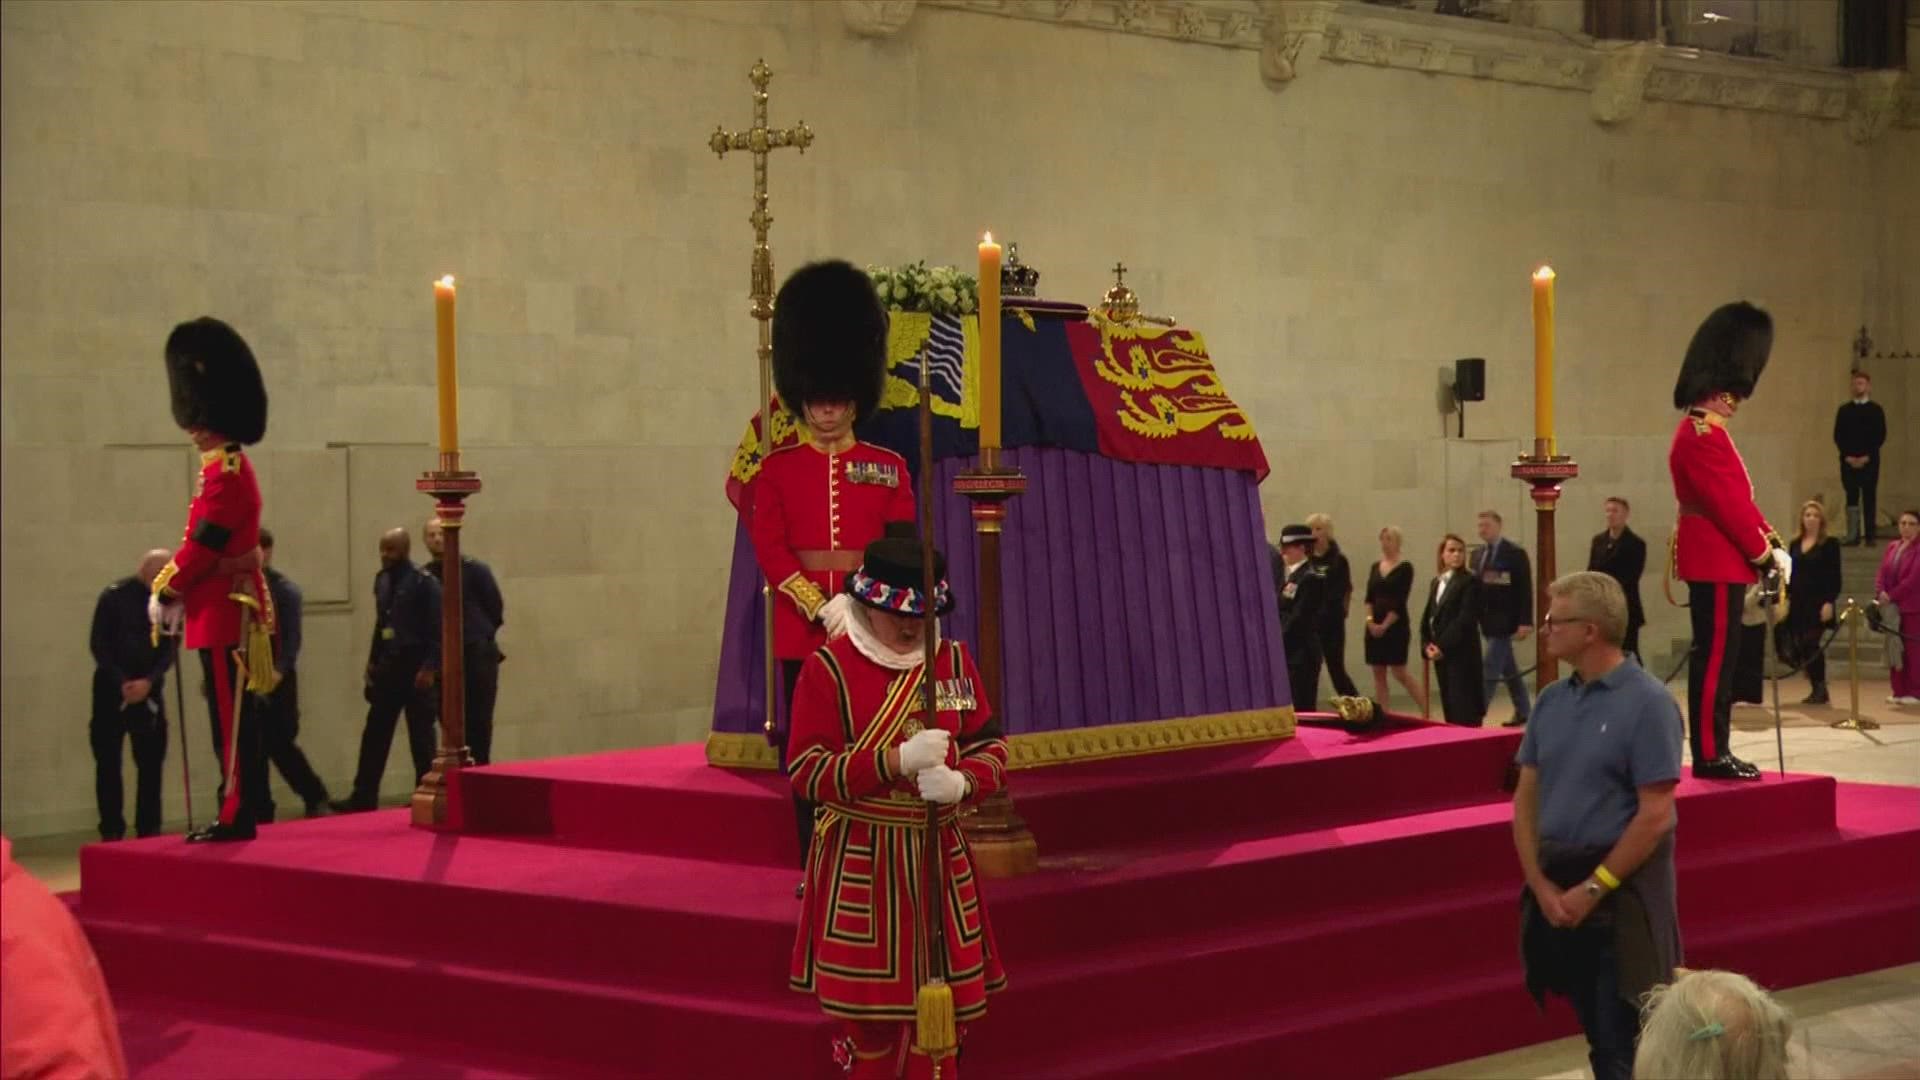 Watch Queen Elizabeth's funeral live starting at 4:30 a.m. Monday on 5 On Your Side.